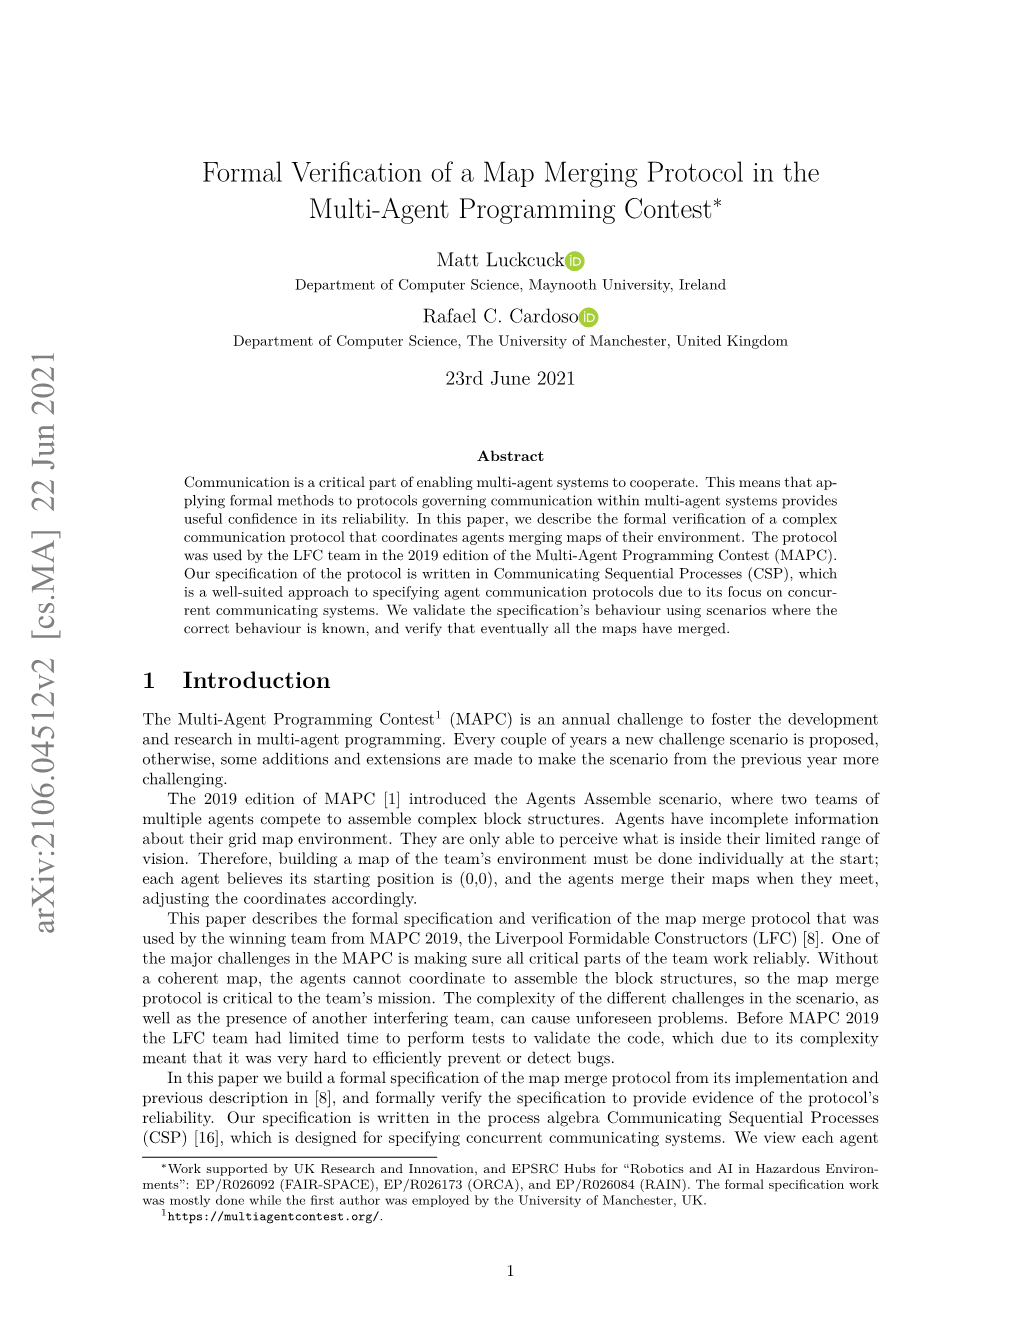 Arxiv:2106.04512V2 [Cs.MA] 22 Jun 2021 Used by the Winning Team from MAPC 2019, the Liverpool Formidable Constructors (LFC) [8]